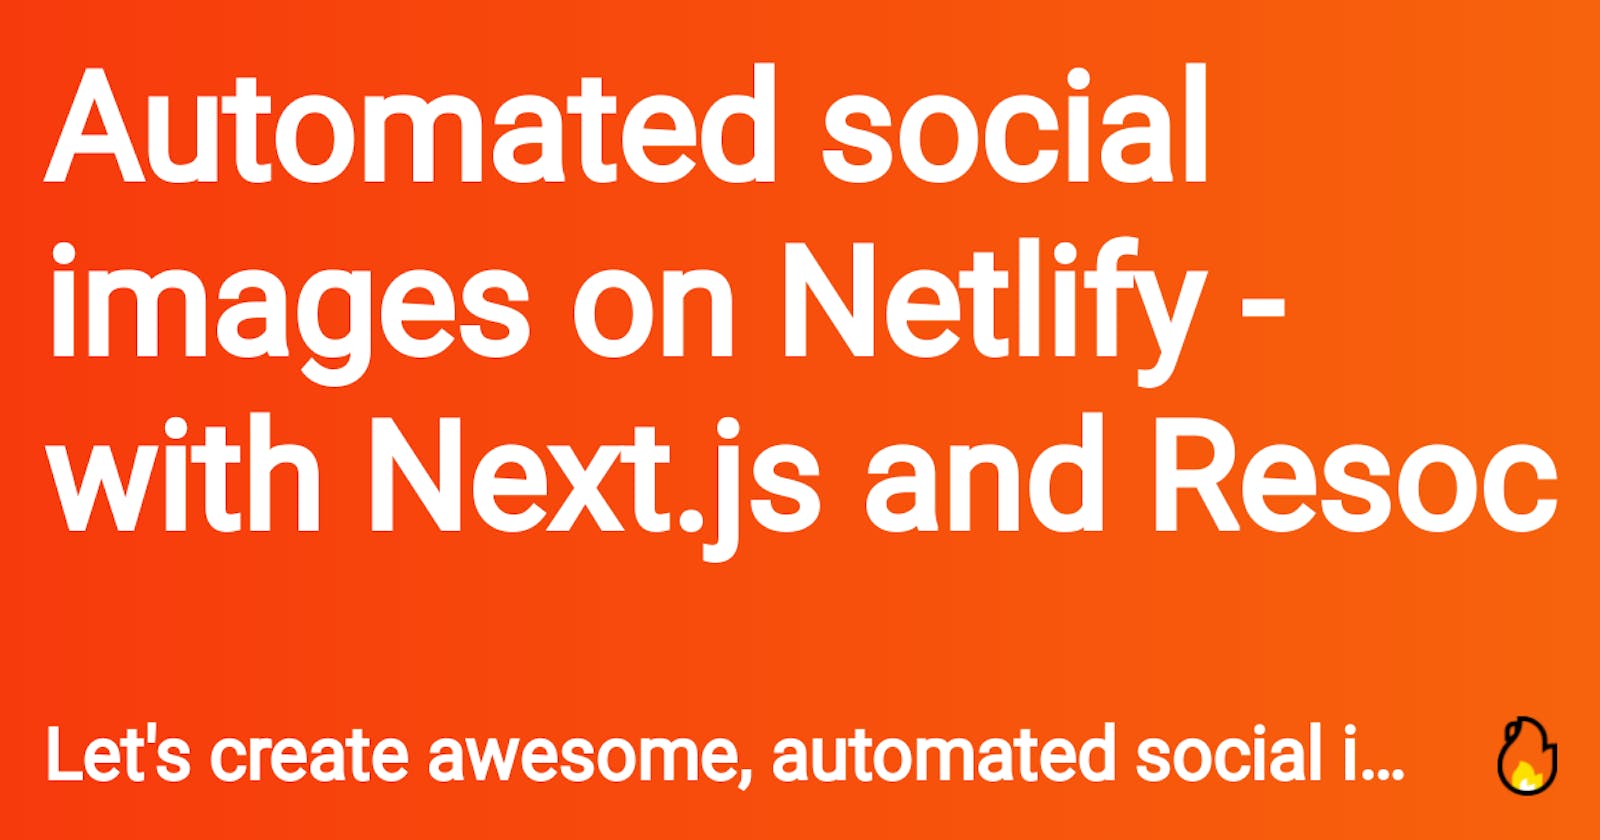 Automated social images on Netlify - with Next.js and Resoc